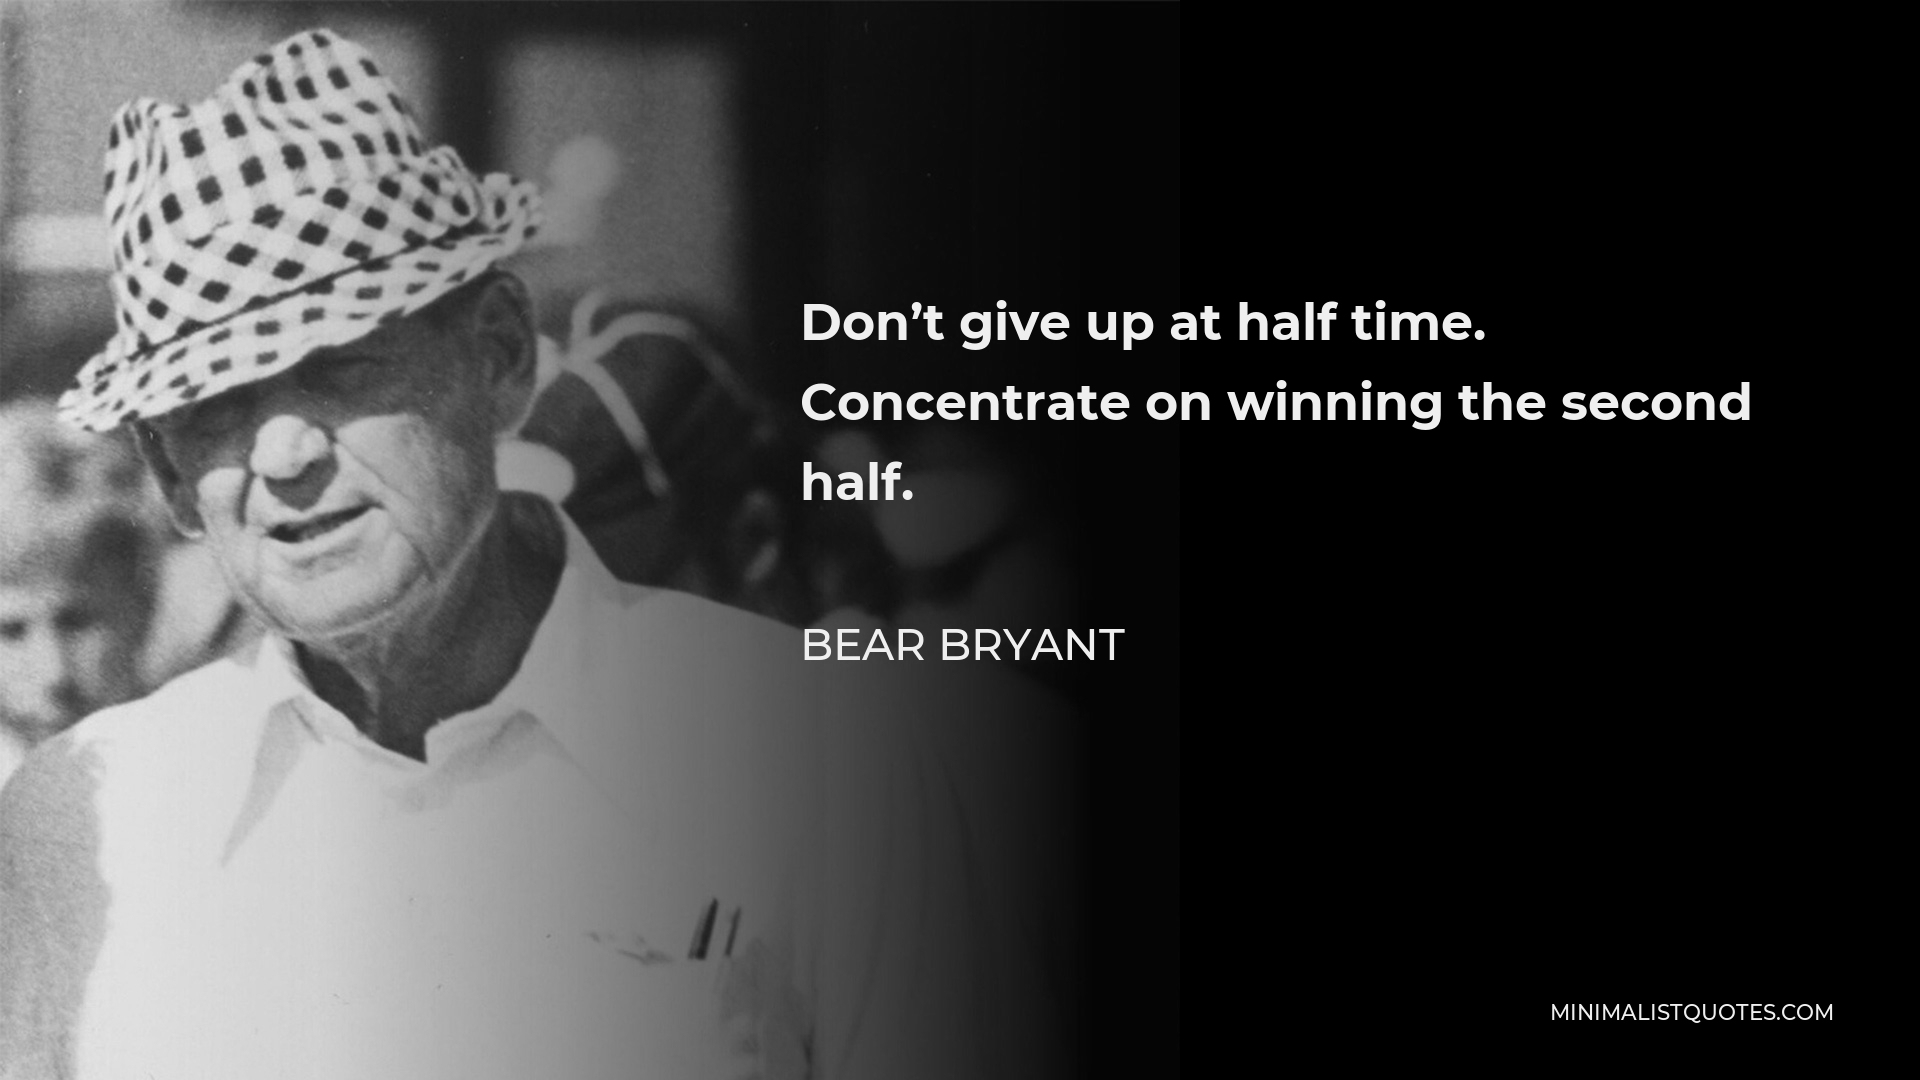 Bear Bryant Quote - Don’t give up at half time. Concentrate on winning the second half.